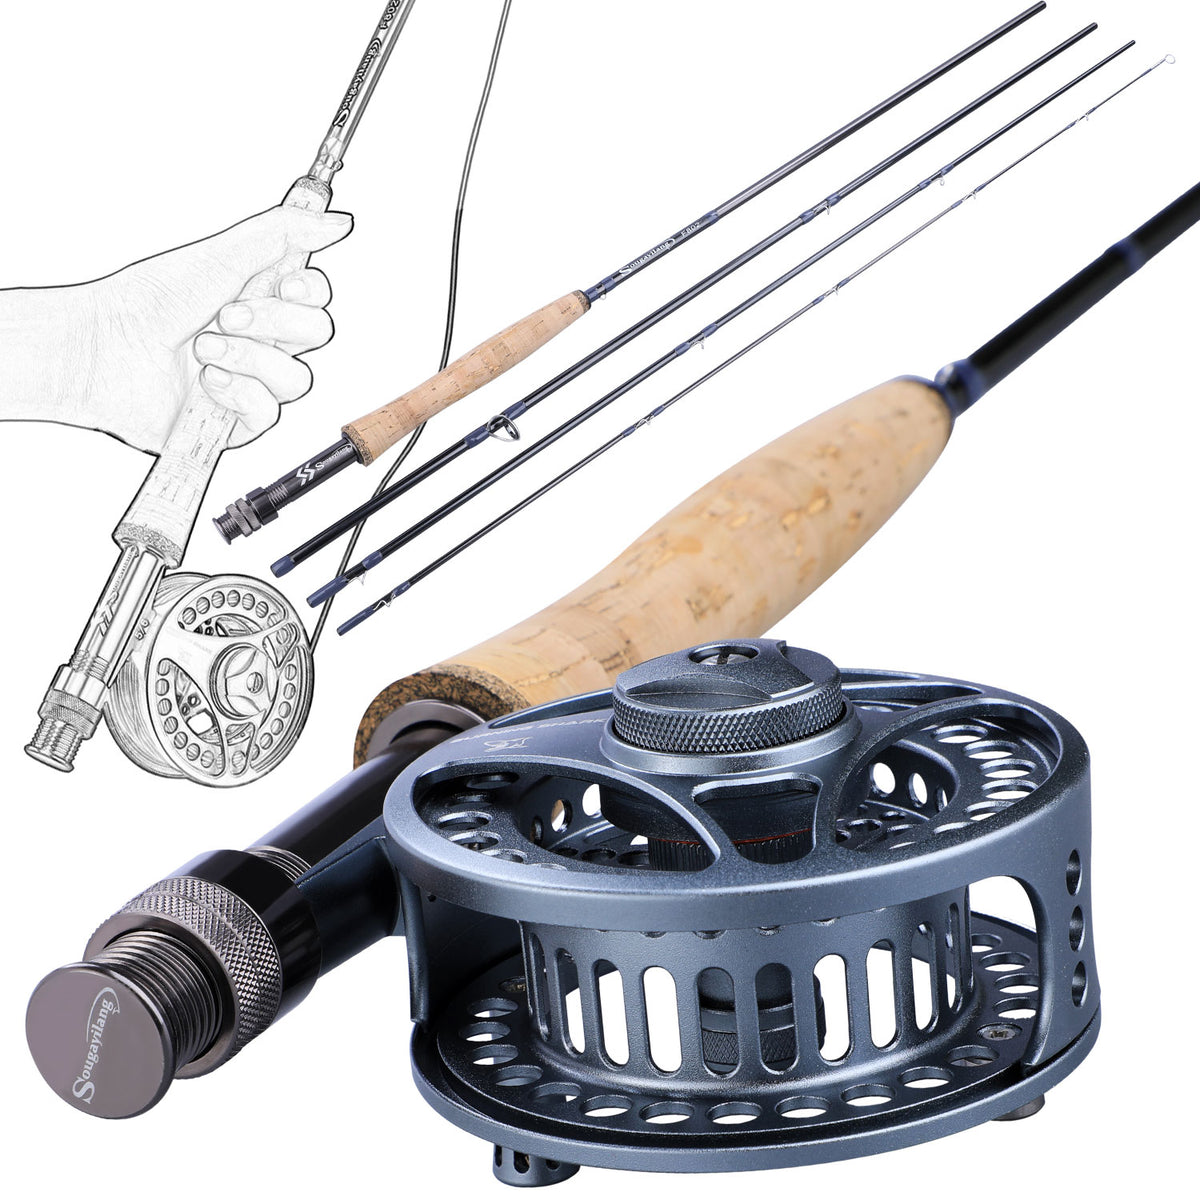 New 8ft 9ft Fly Fishing Rod Reel Combos 4 Section Portable Carbon Trout  Salmon Fish Rod for Beginners Fly Fishing Pole